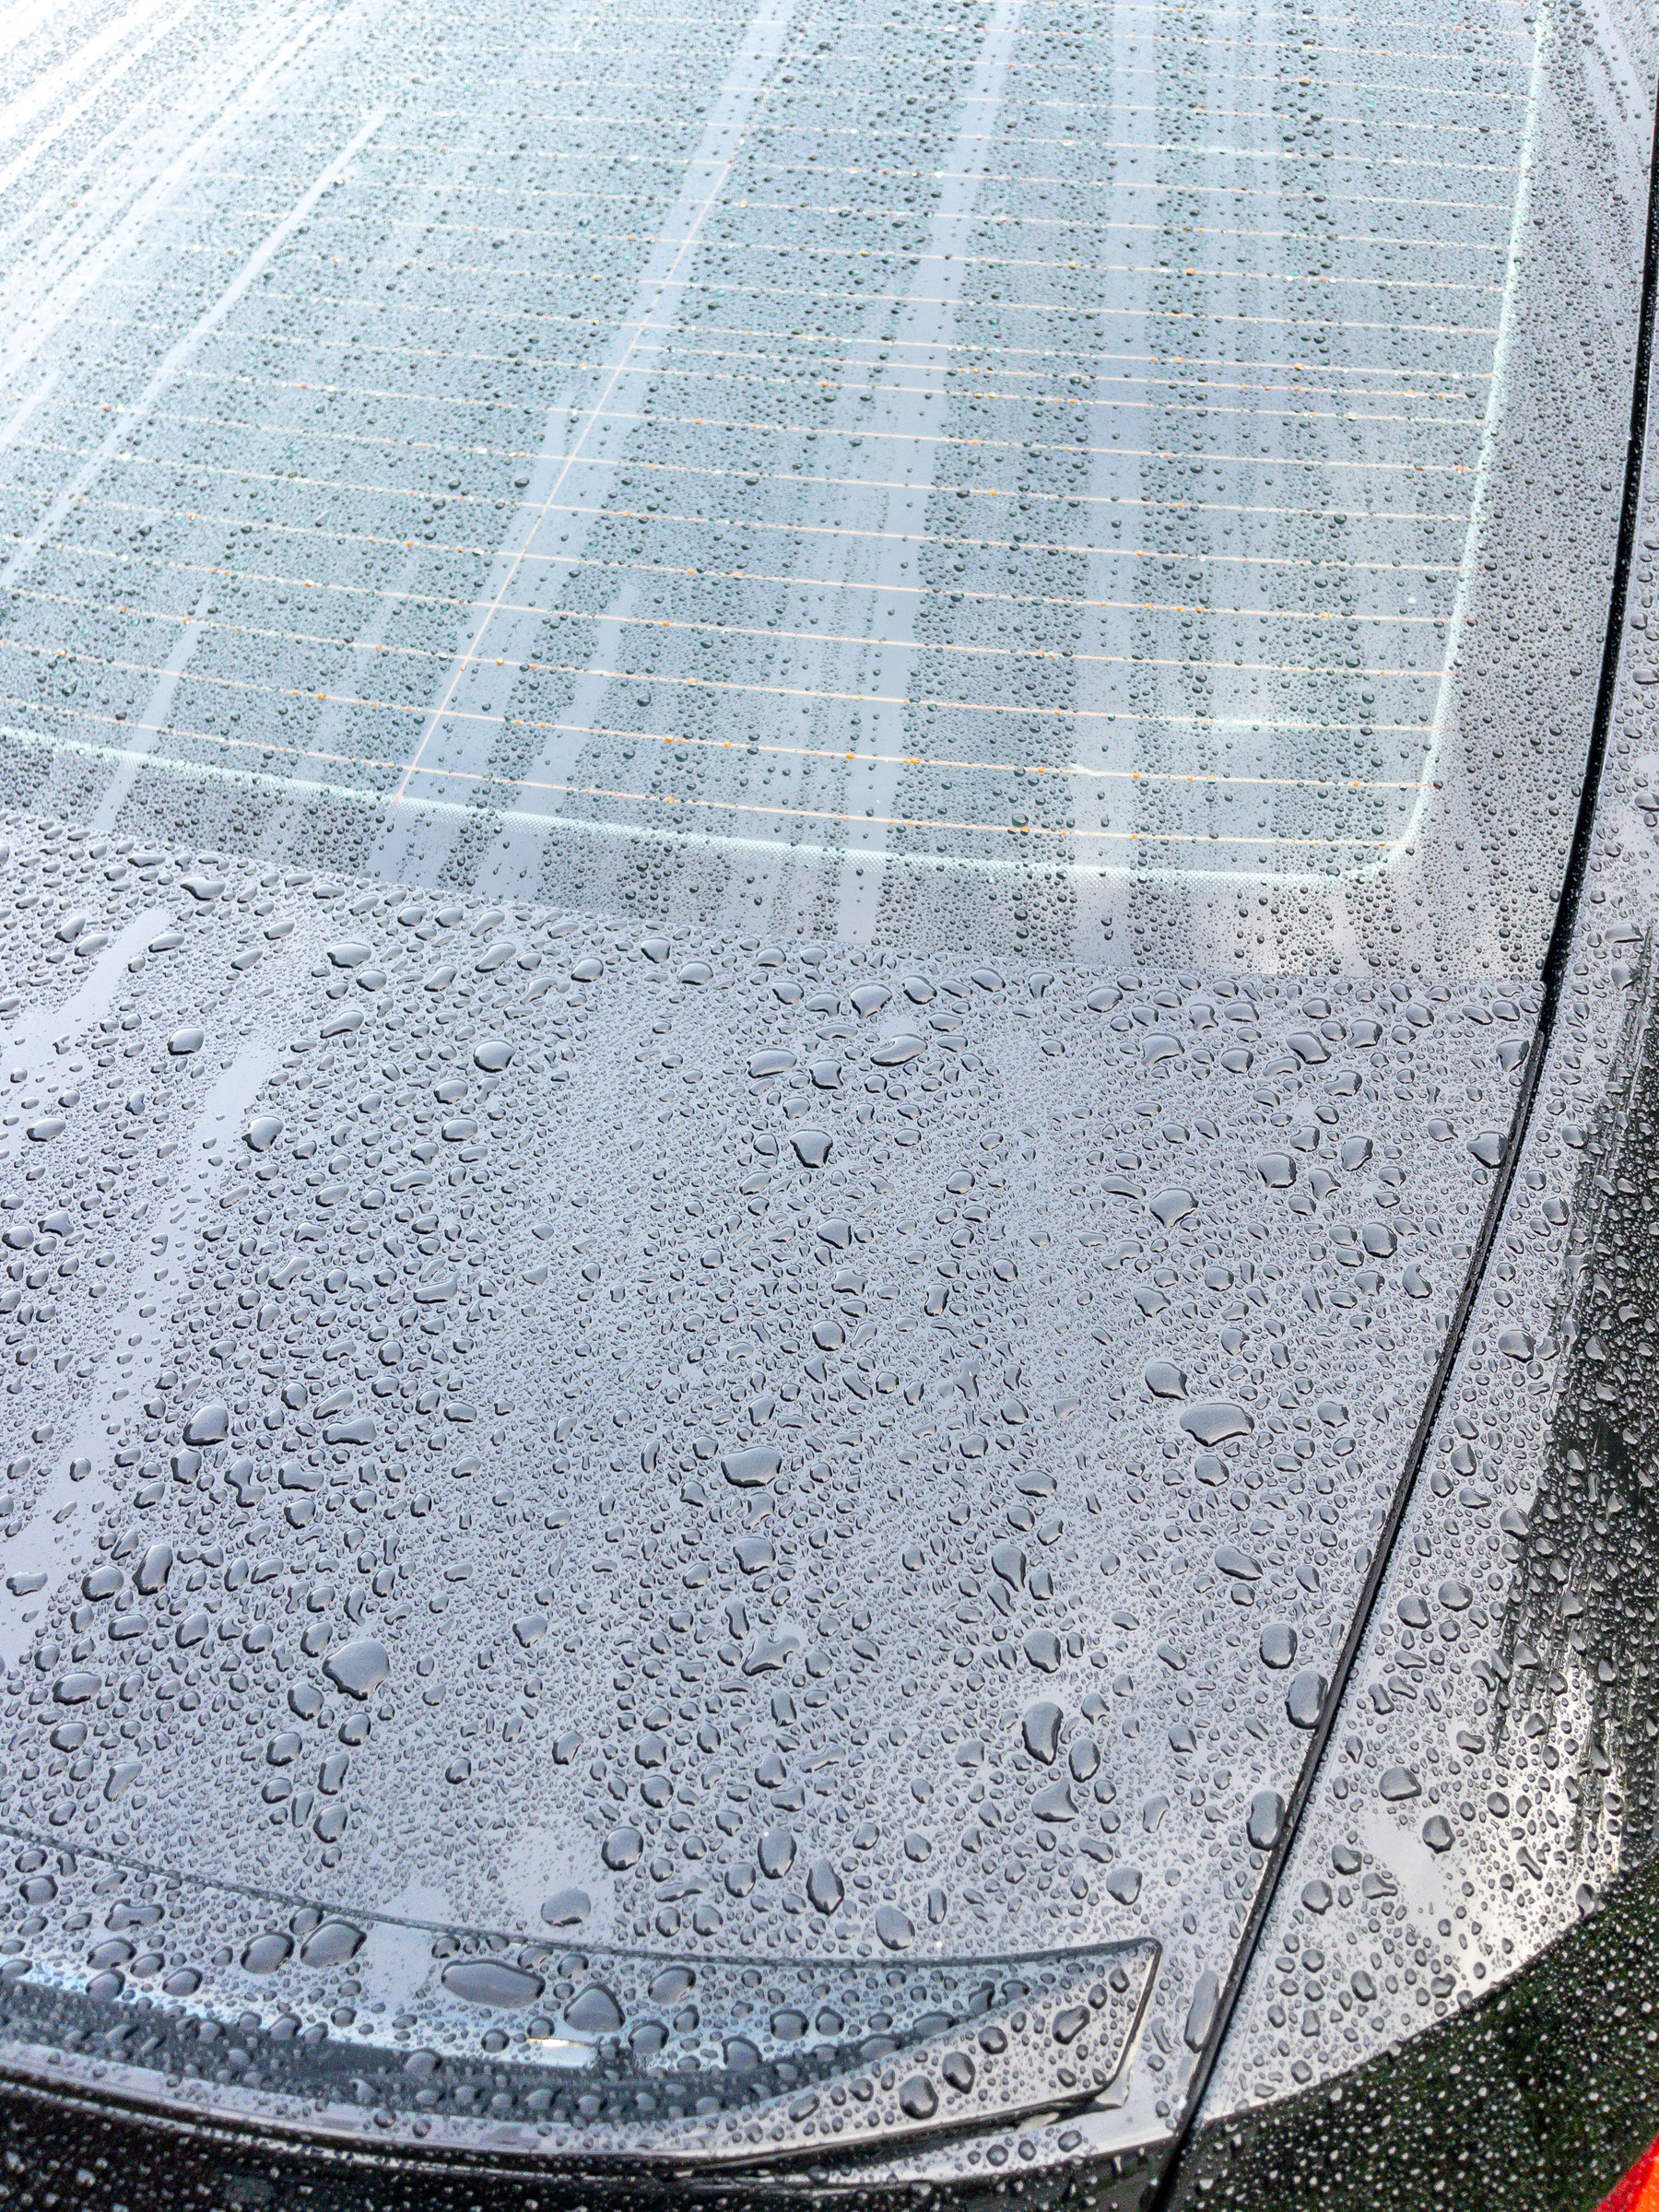 Raindrops and streaks on the trunk hood and rear window of a car.